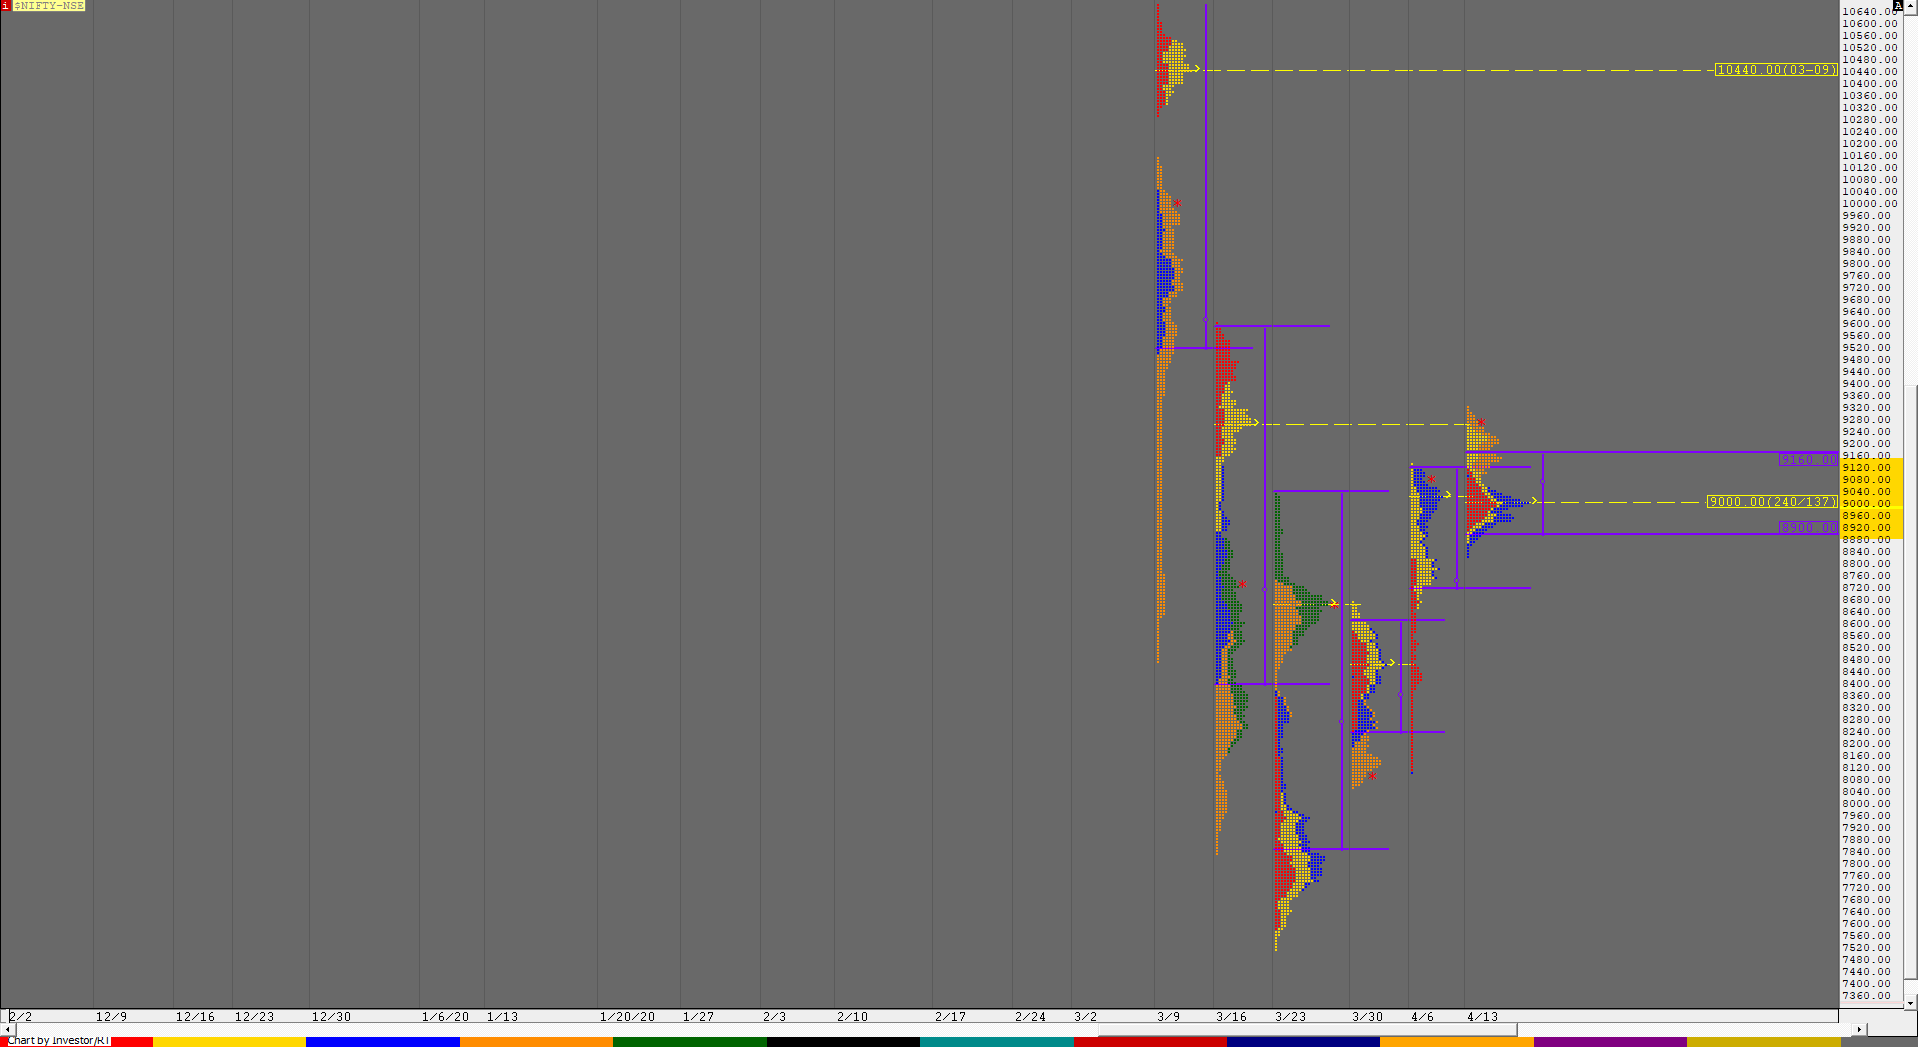 N Weekly 2 Weekly Charts (13Th To 17Th Apr 2020) And Market Profile Analysis Banknifty Futures, Charts, Day Trading, Intraday Trading, Intraday Trading Strategies, Market Profile, Market Profile Trading Strategies, Nifty Futures, Order Flow Analysis, Support And Resistance, Technical Analysis, Trading Strategies, Volume Profile Trading